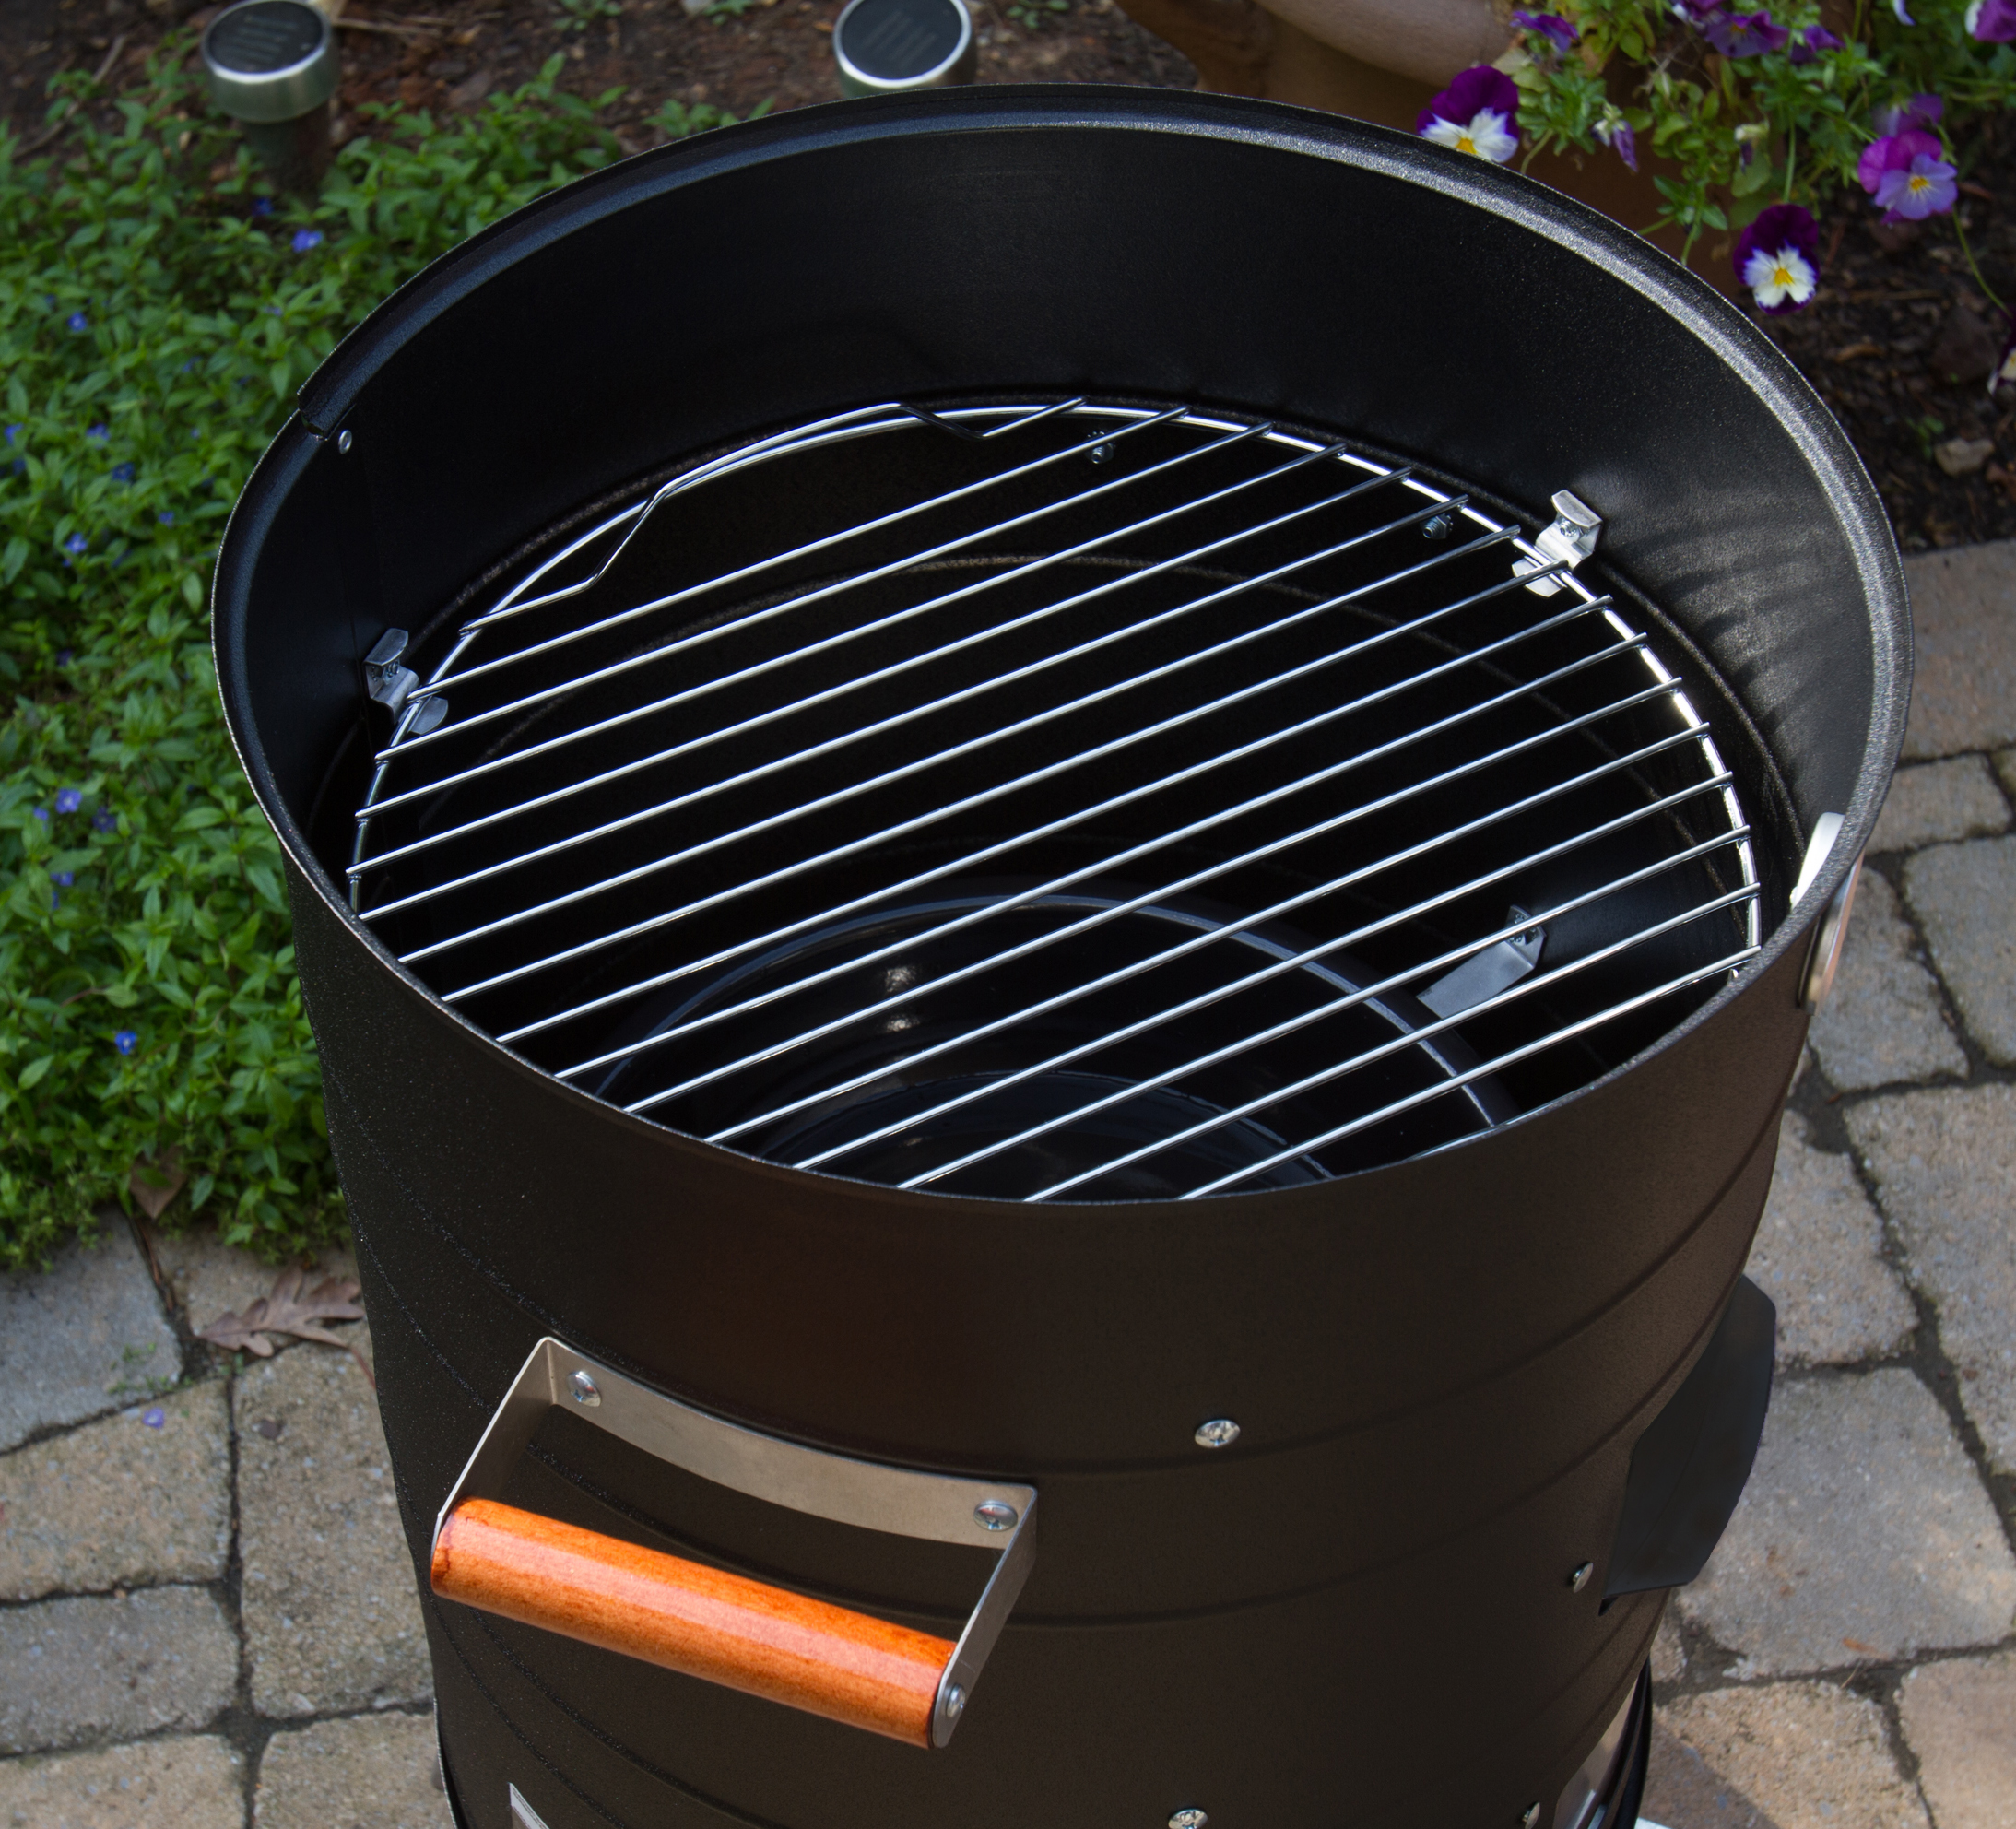 Americana Charcoal Water Smoker with 2 Levels of Cooking - image 4 of 7